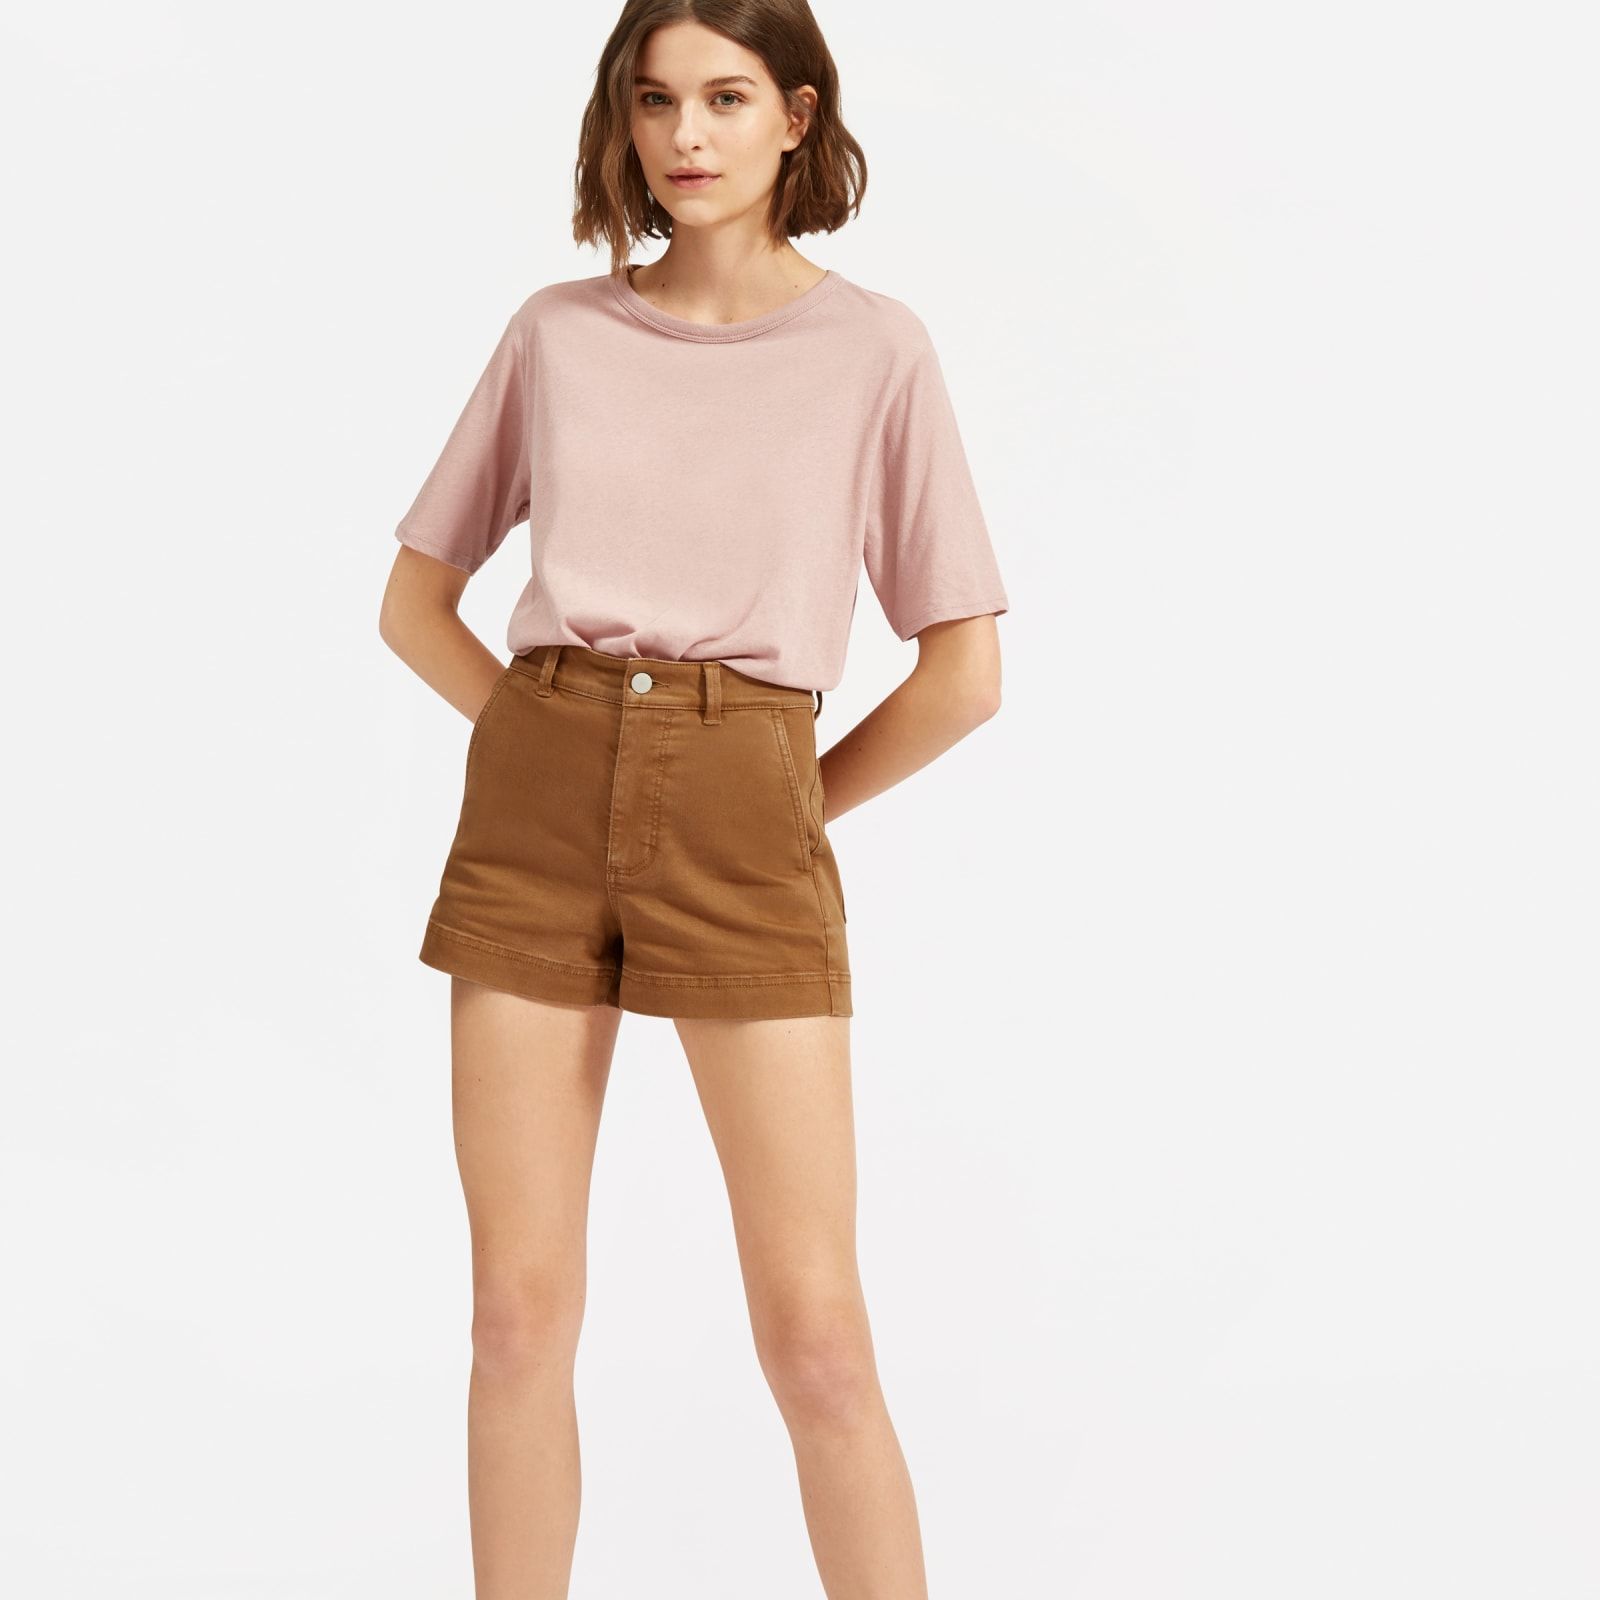 Women's Air Oversized Crew T-Shirt by Everlane in Faded Pink, Size XL | Everlane